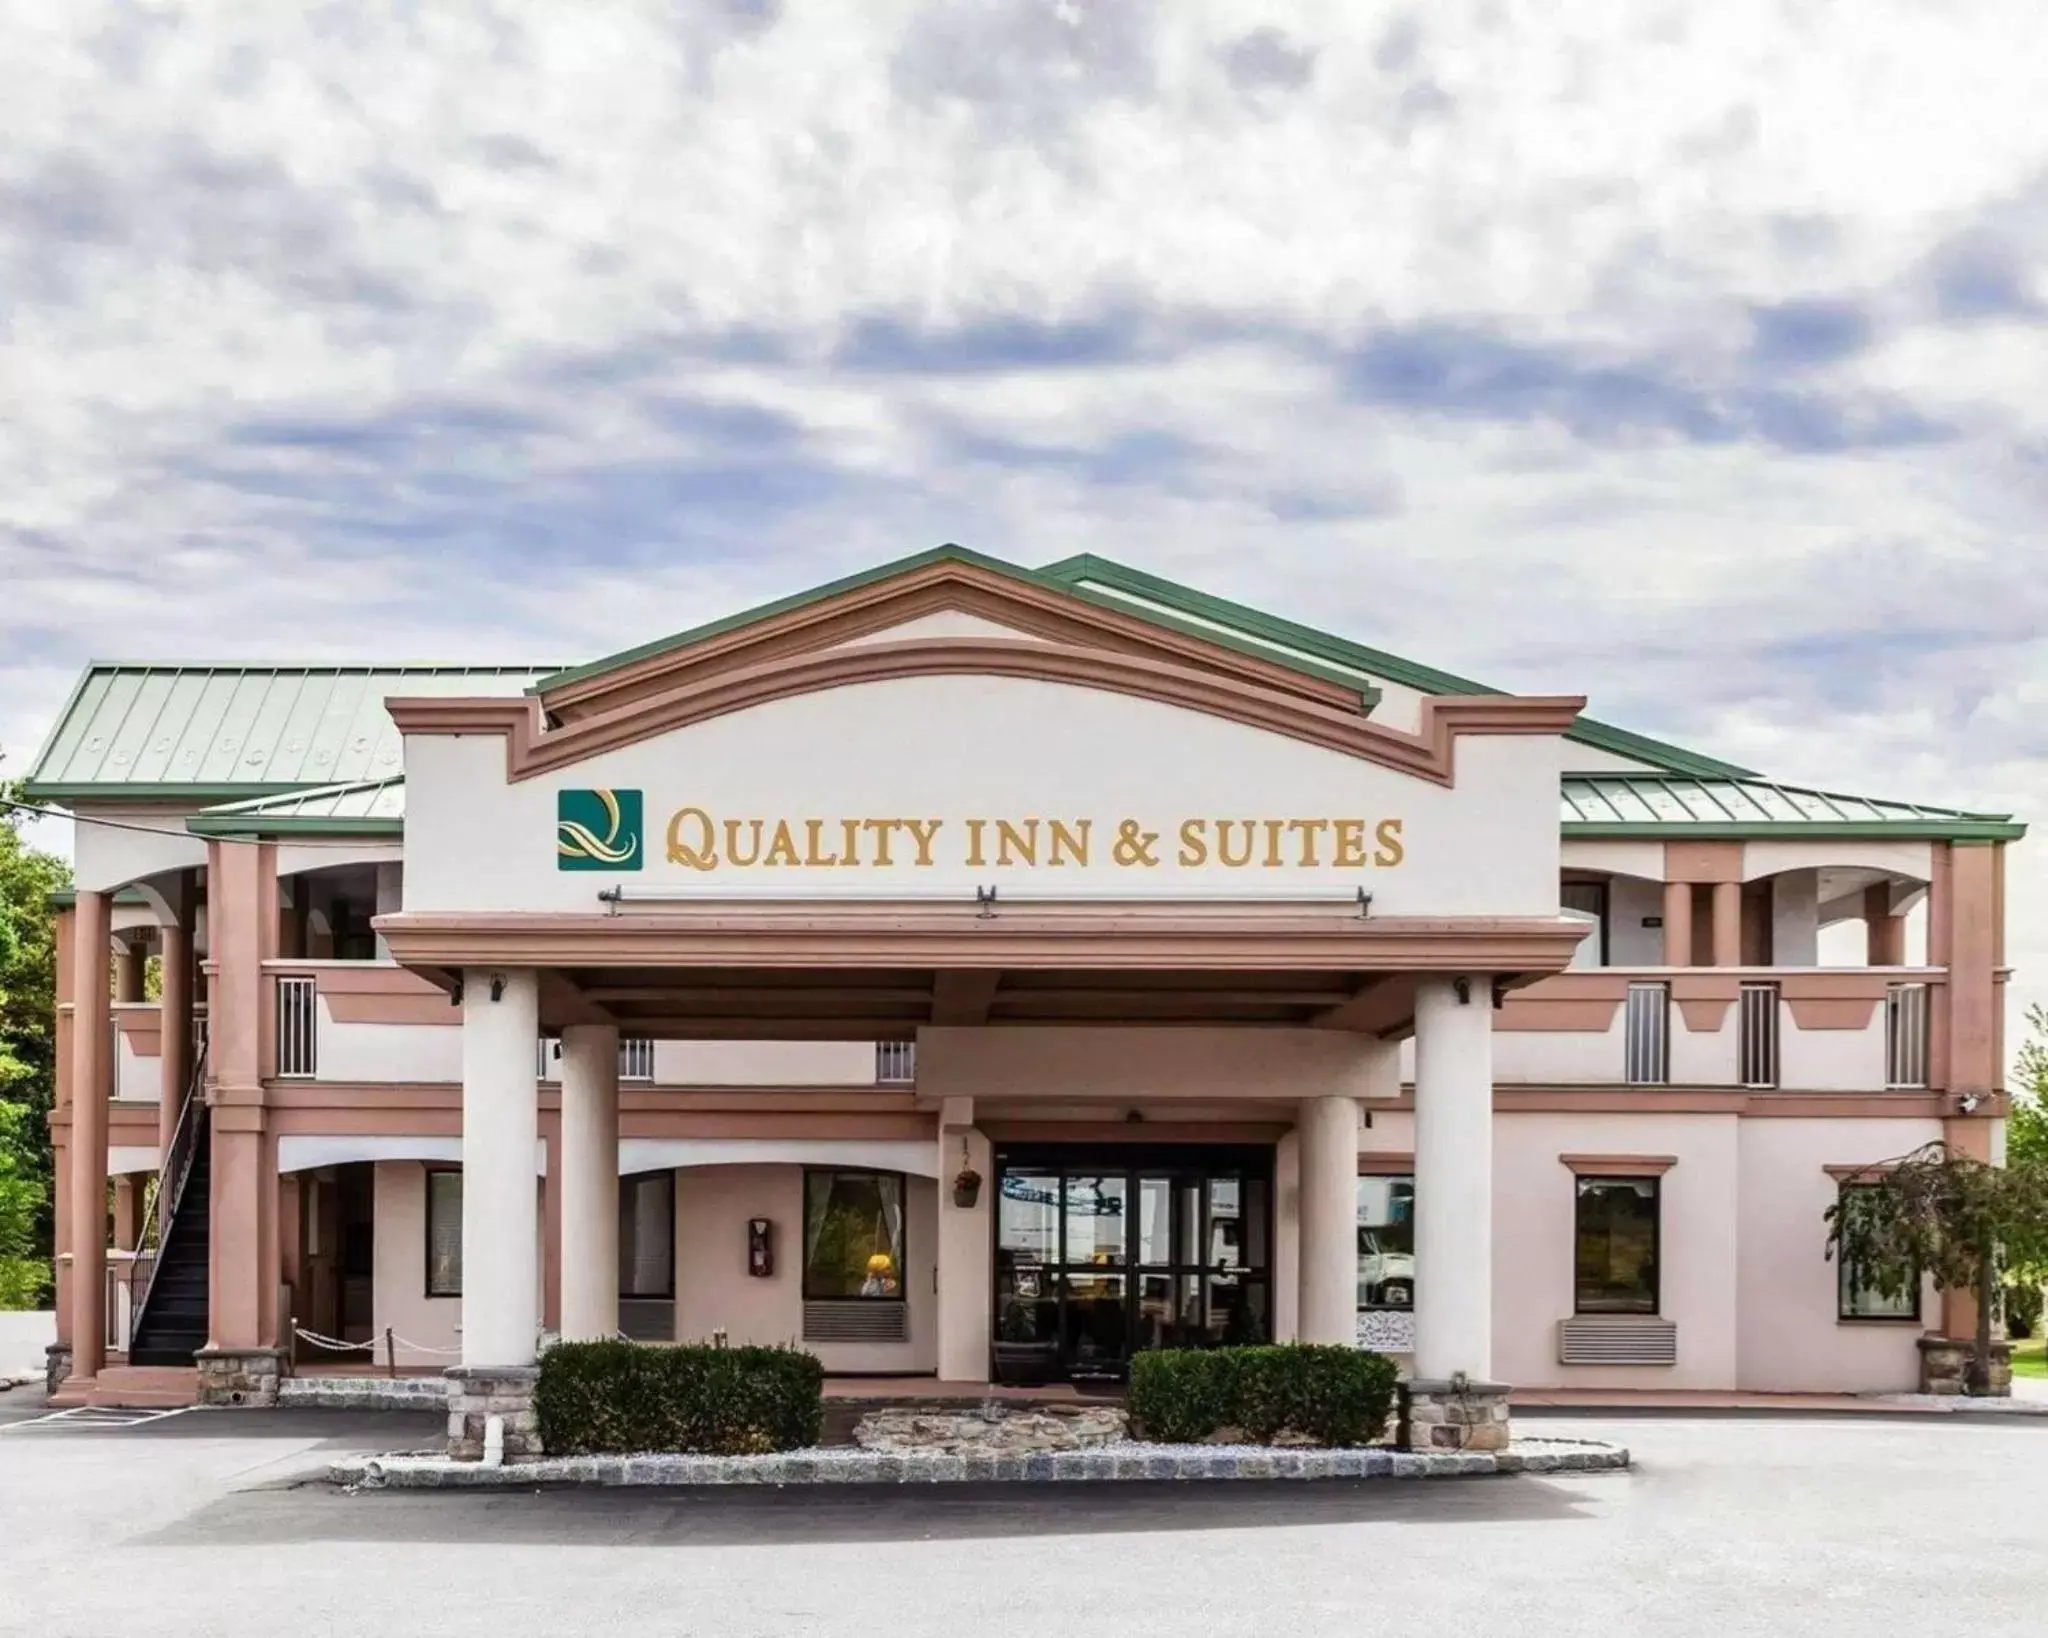 Property building in Quality Inn & Suites Quakertown-Allentown